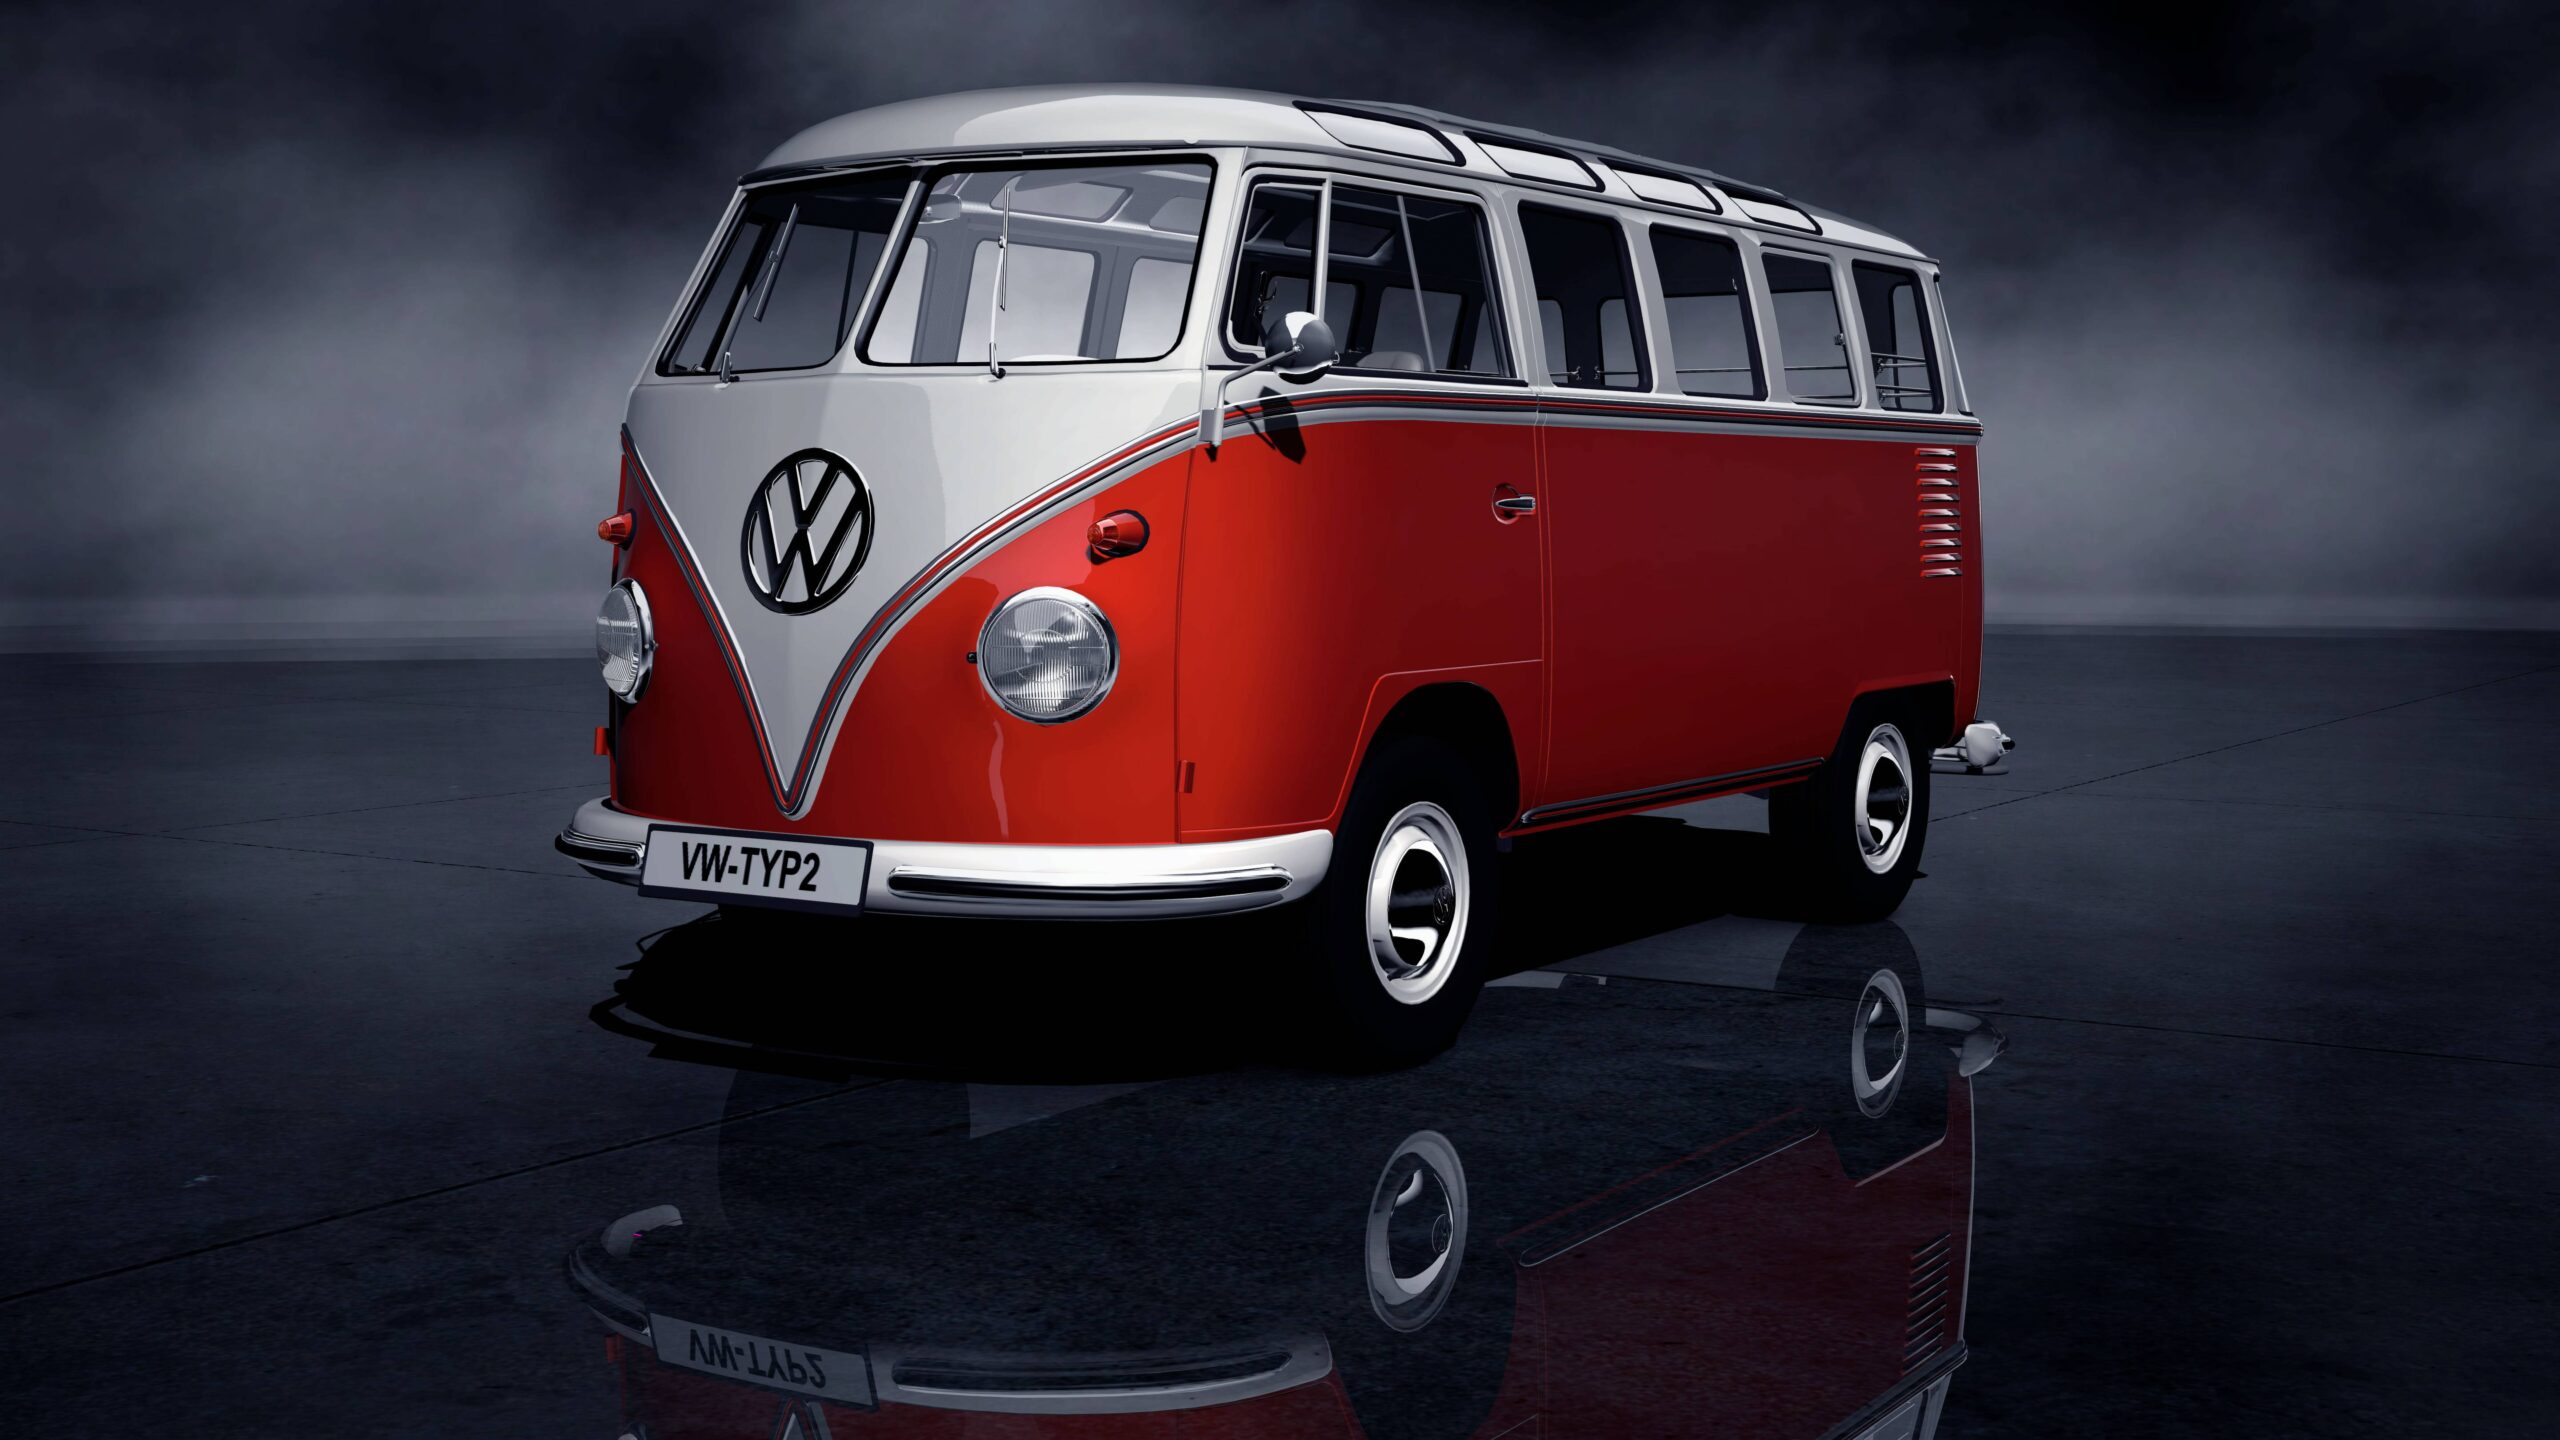 VW Bus Wallpapers Free Download · VW Wallpapers